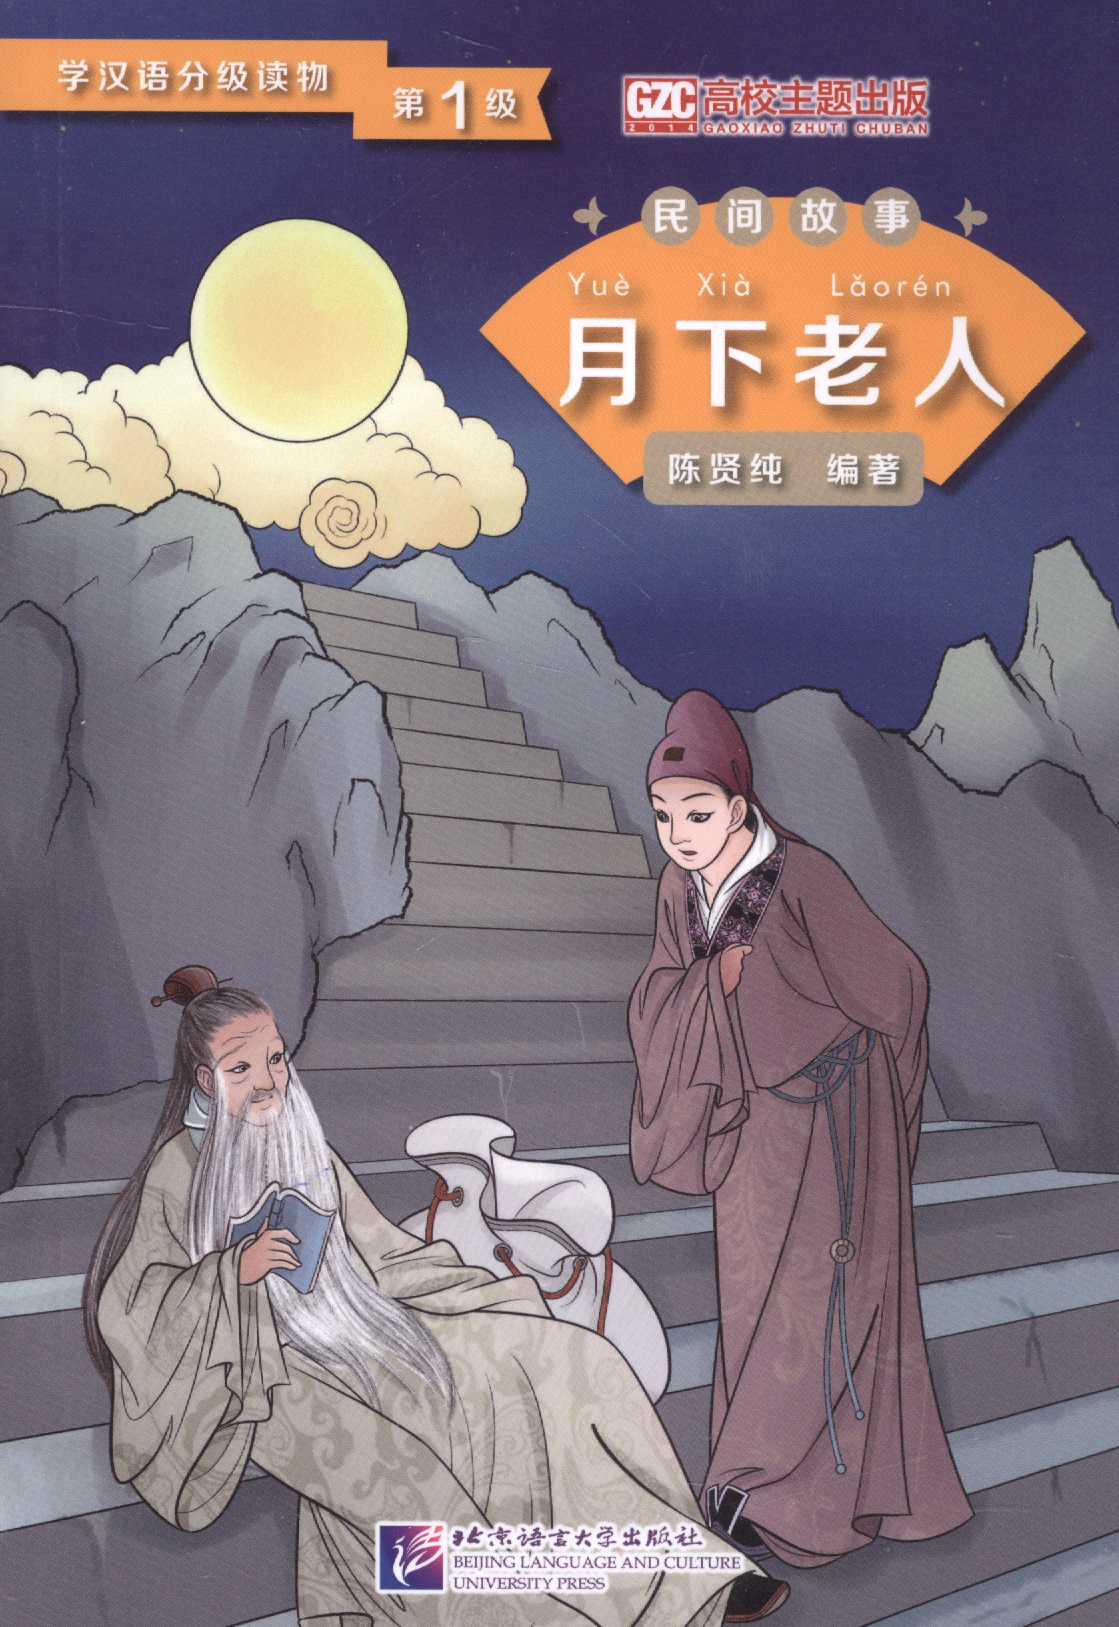 Graded Readers for Chinese Language Learners (Folktales): The Old Man under the Moon.    